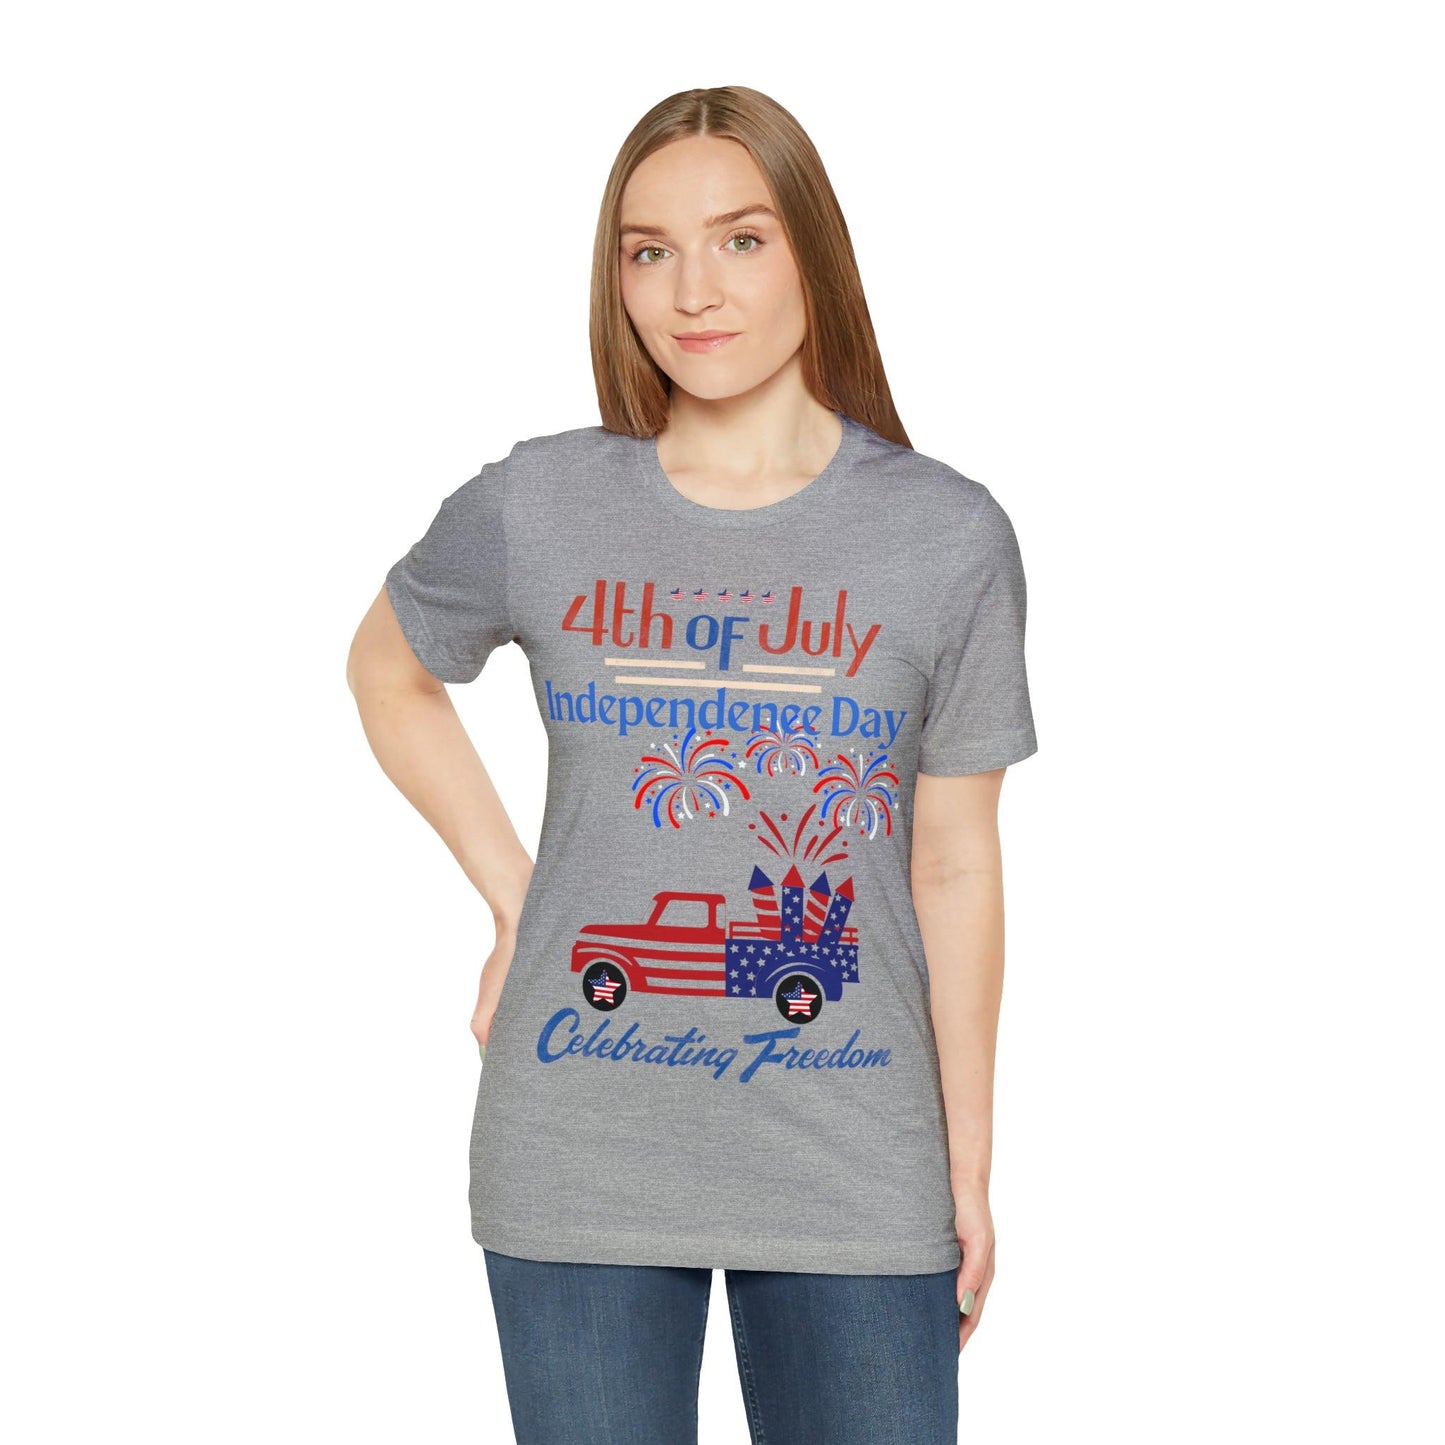 Celebrate Independence with our Patriotic Freedom Shirt! Men and Women's 4th of July Shirt featuring USA Flag, Fireworks, and Joyful Spirit!"